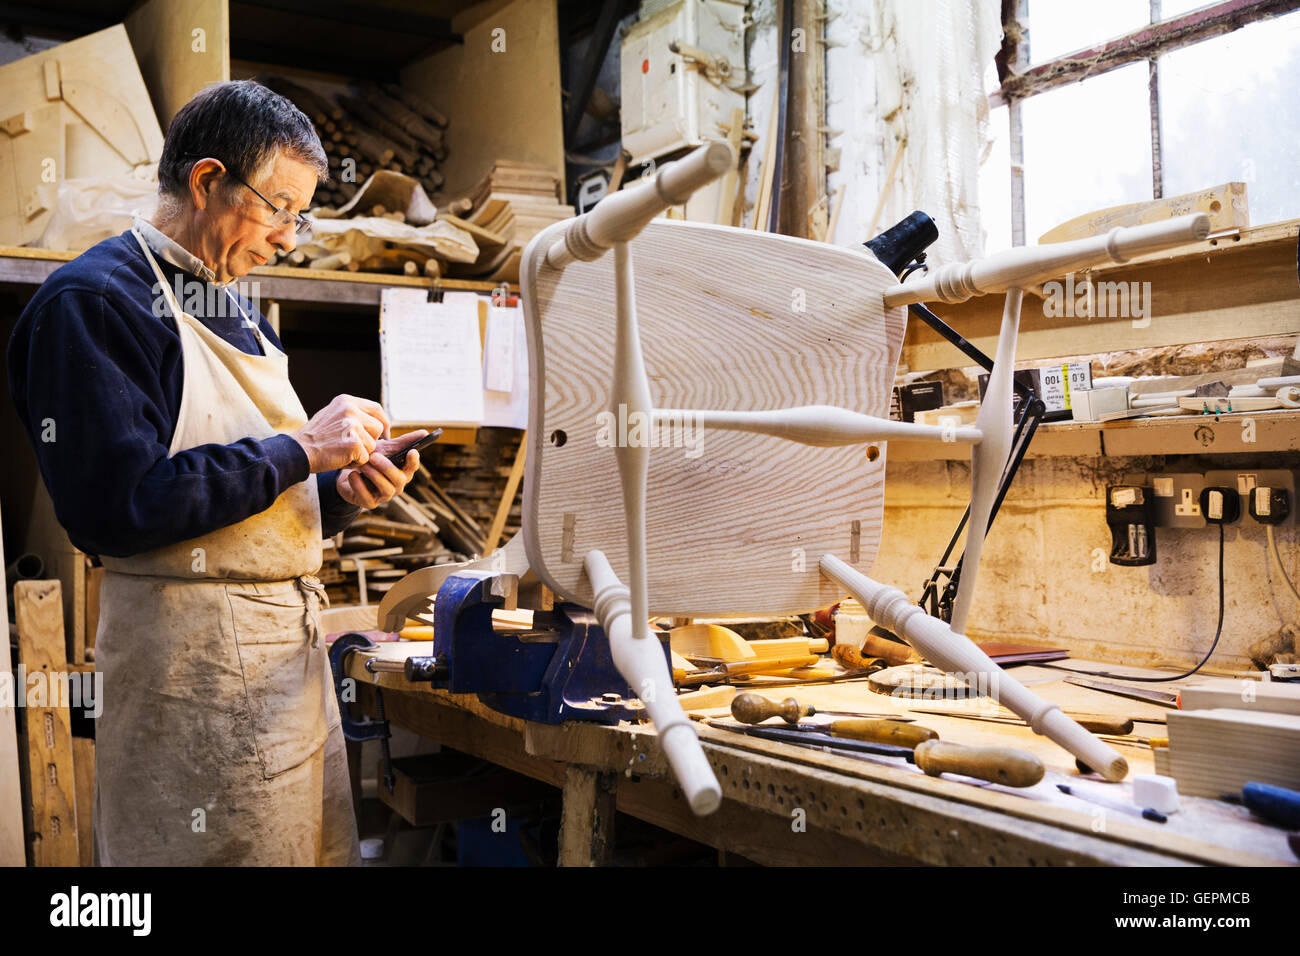 Man standing at a work bench in a carpentry workshop, working on a wooden chair. Stock Photo